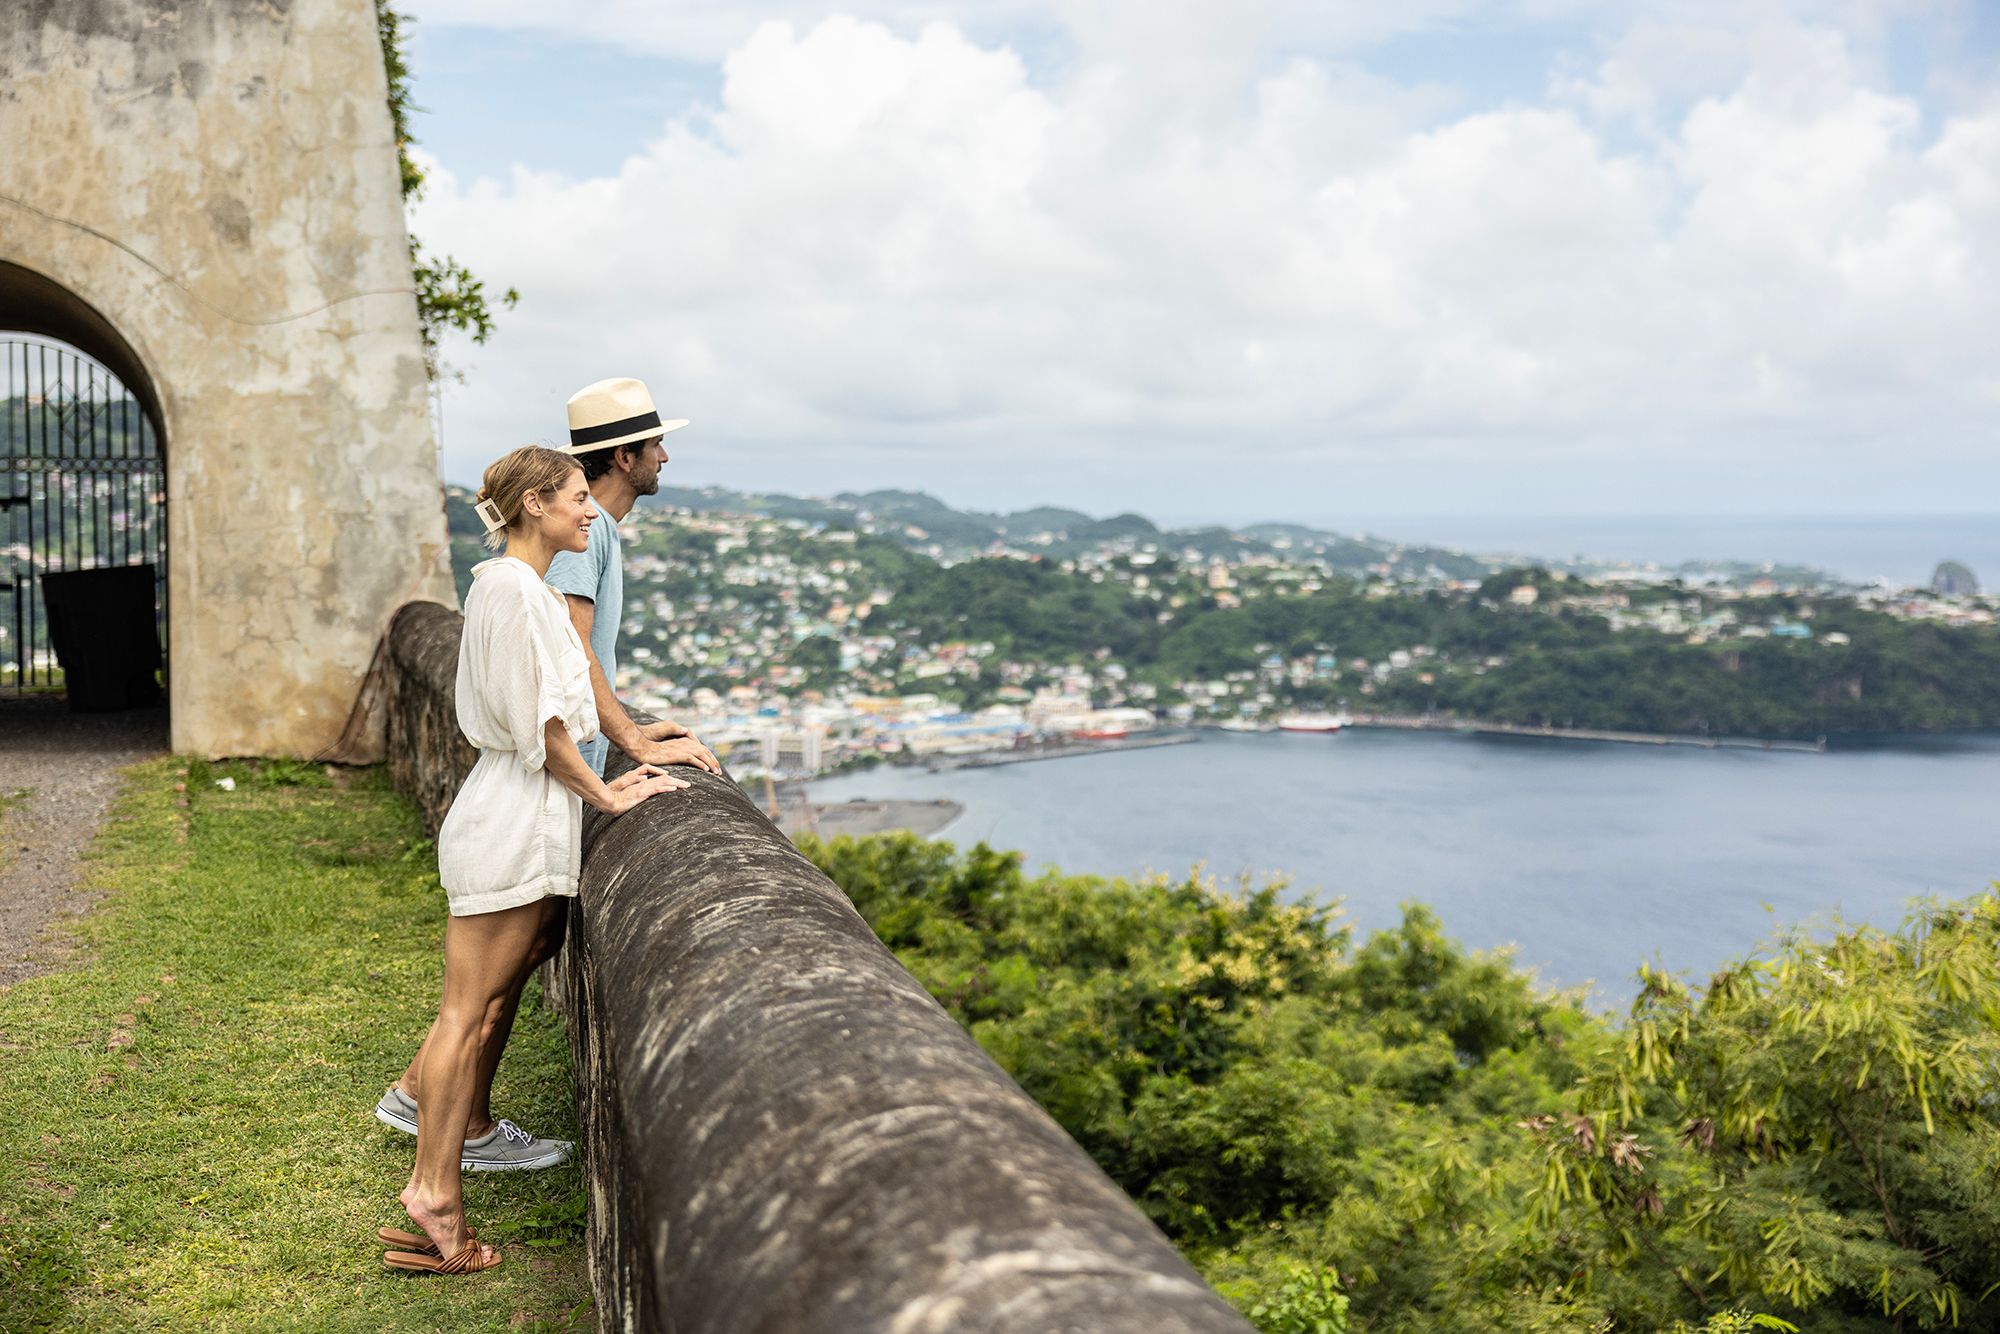 Have The Ultimate Saint Vincent Vacation With These Exciting Things To Do